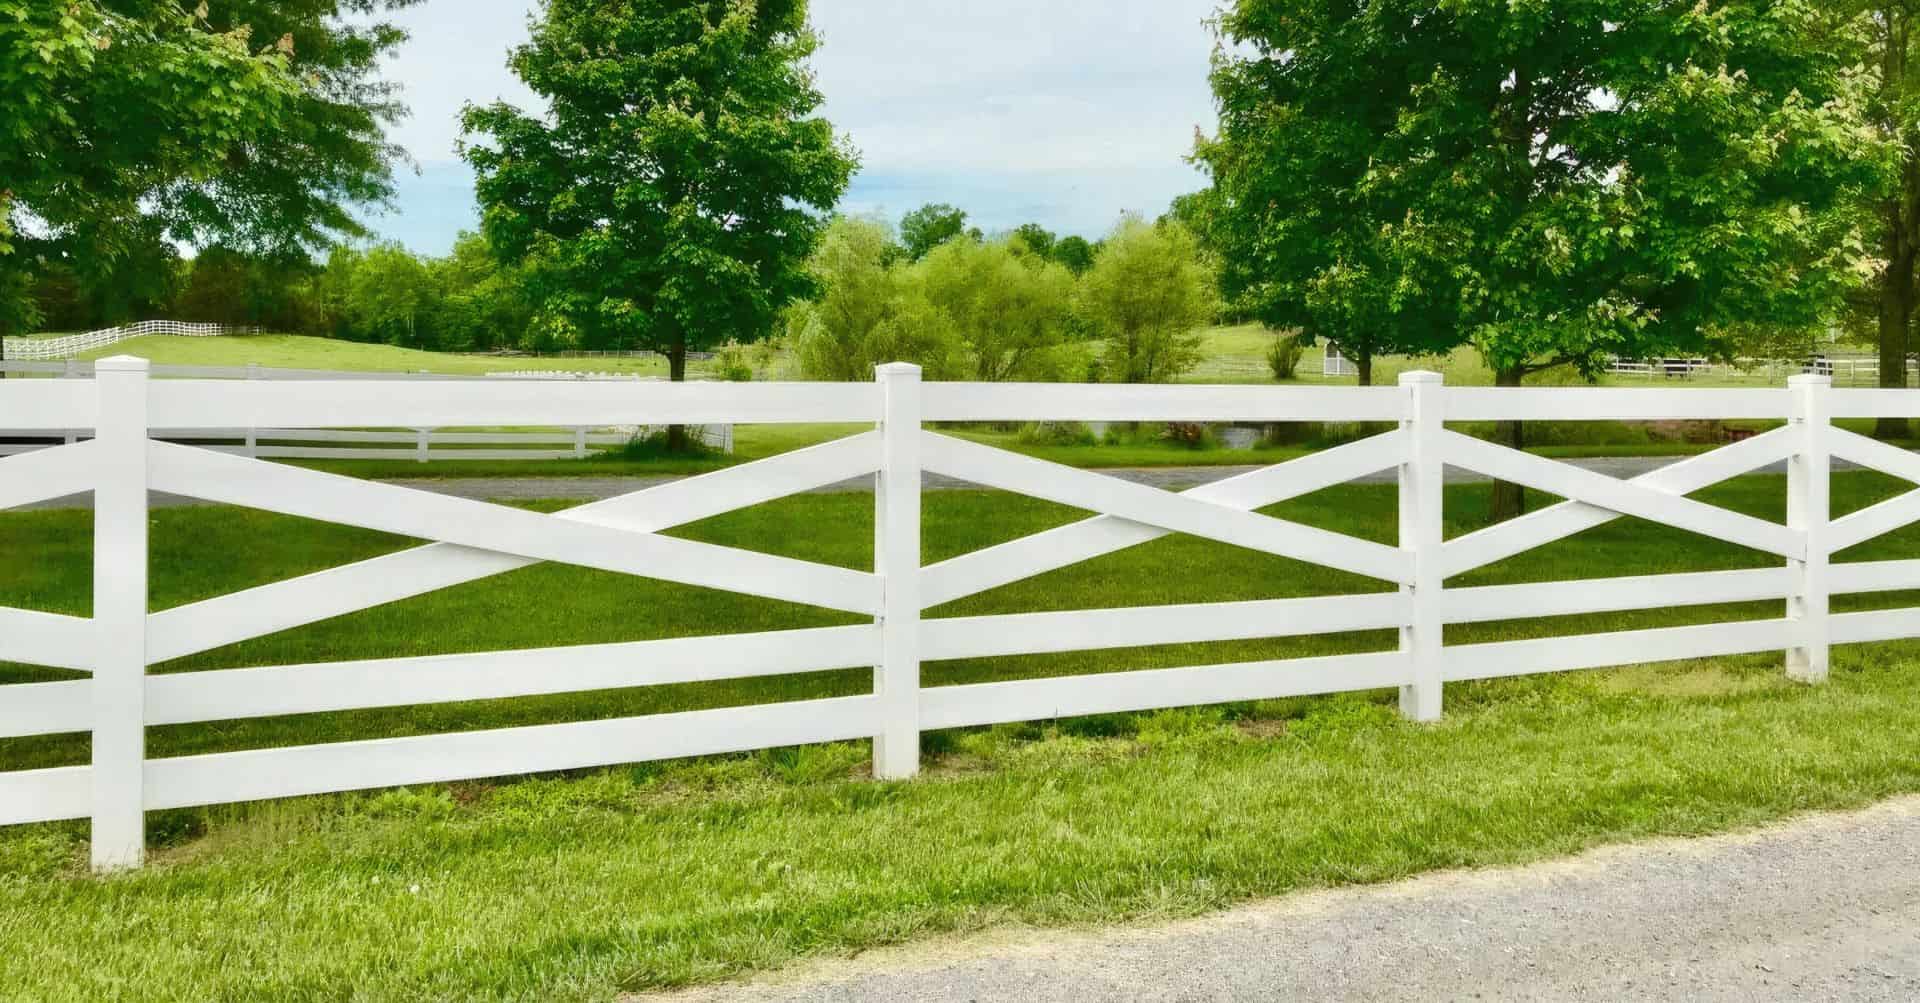 Vinyl cross rail ranch style fence surrounded by lush grass and tall trees in the background - idyllic countryside scene.